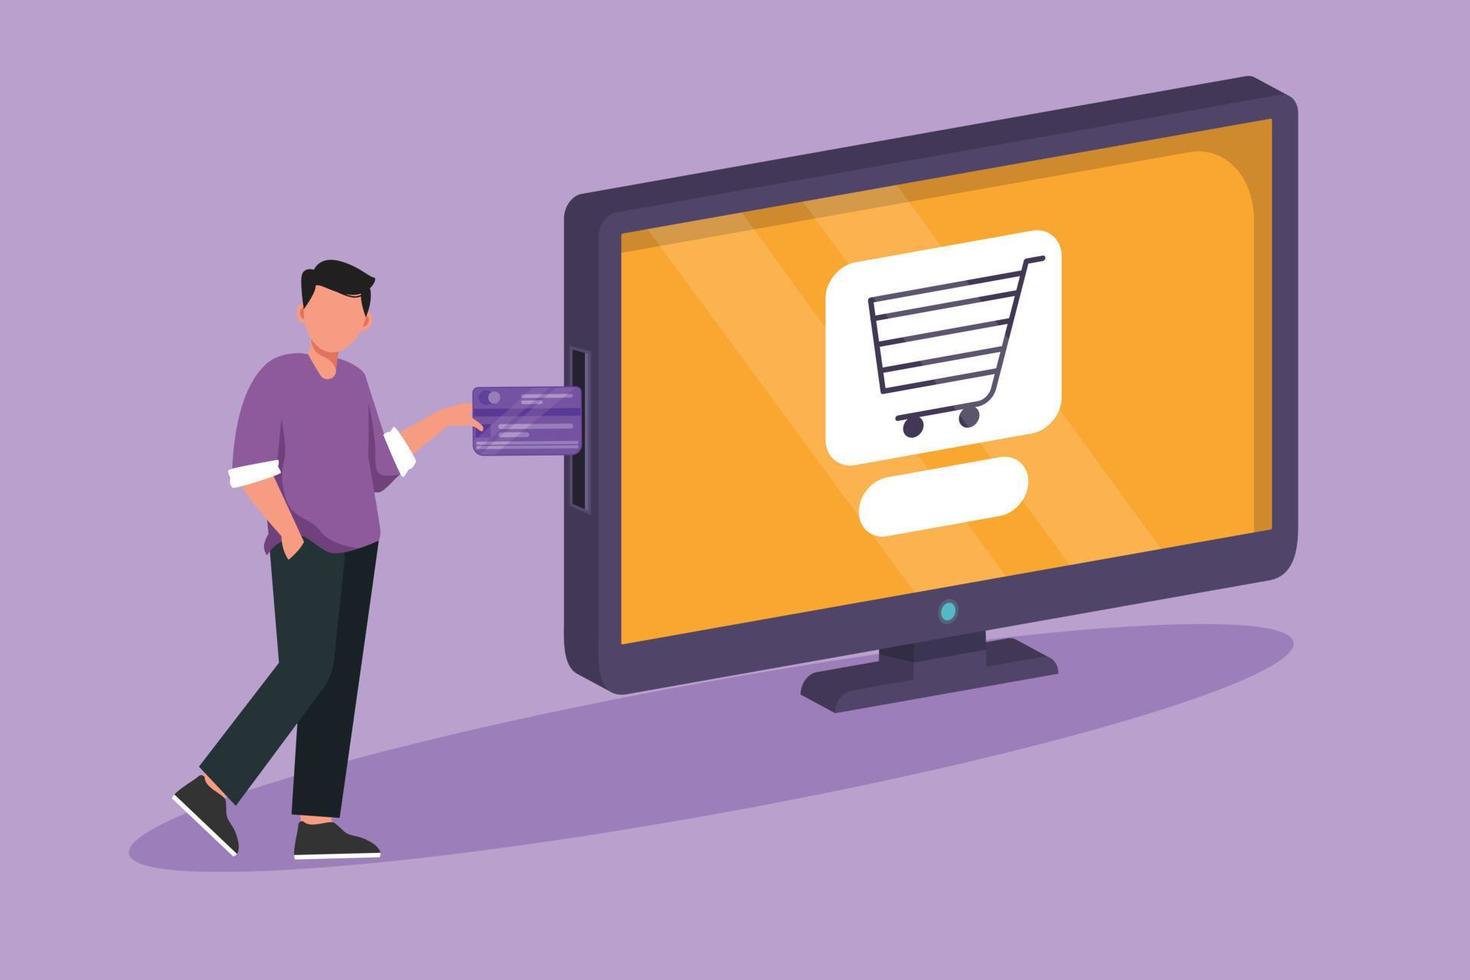 Graphic flat design drawing young man inserting credit card into large monitor screen with shopping cart inside. E-commerce, digital payment and online store concept. Cartoon style vector illustration